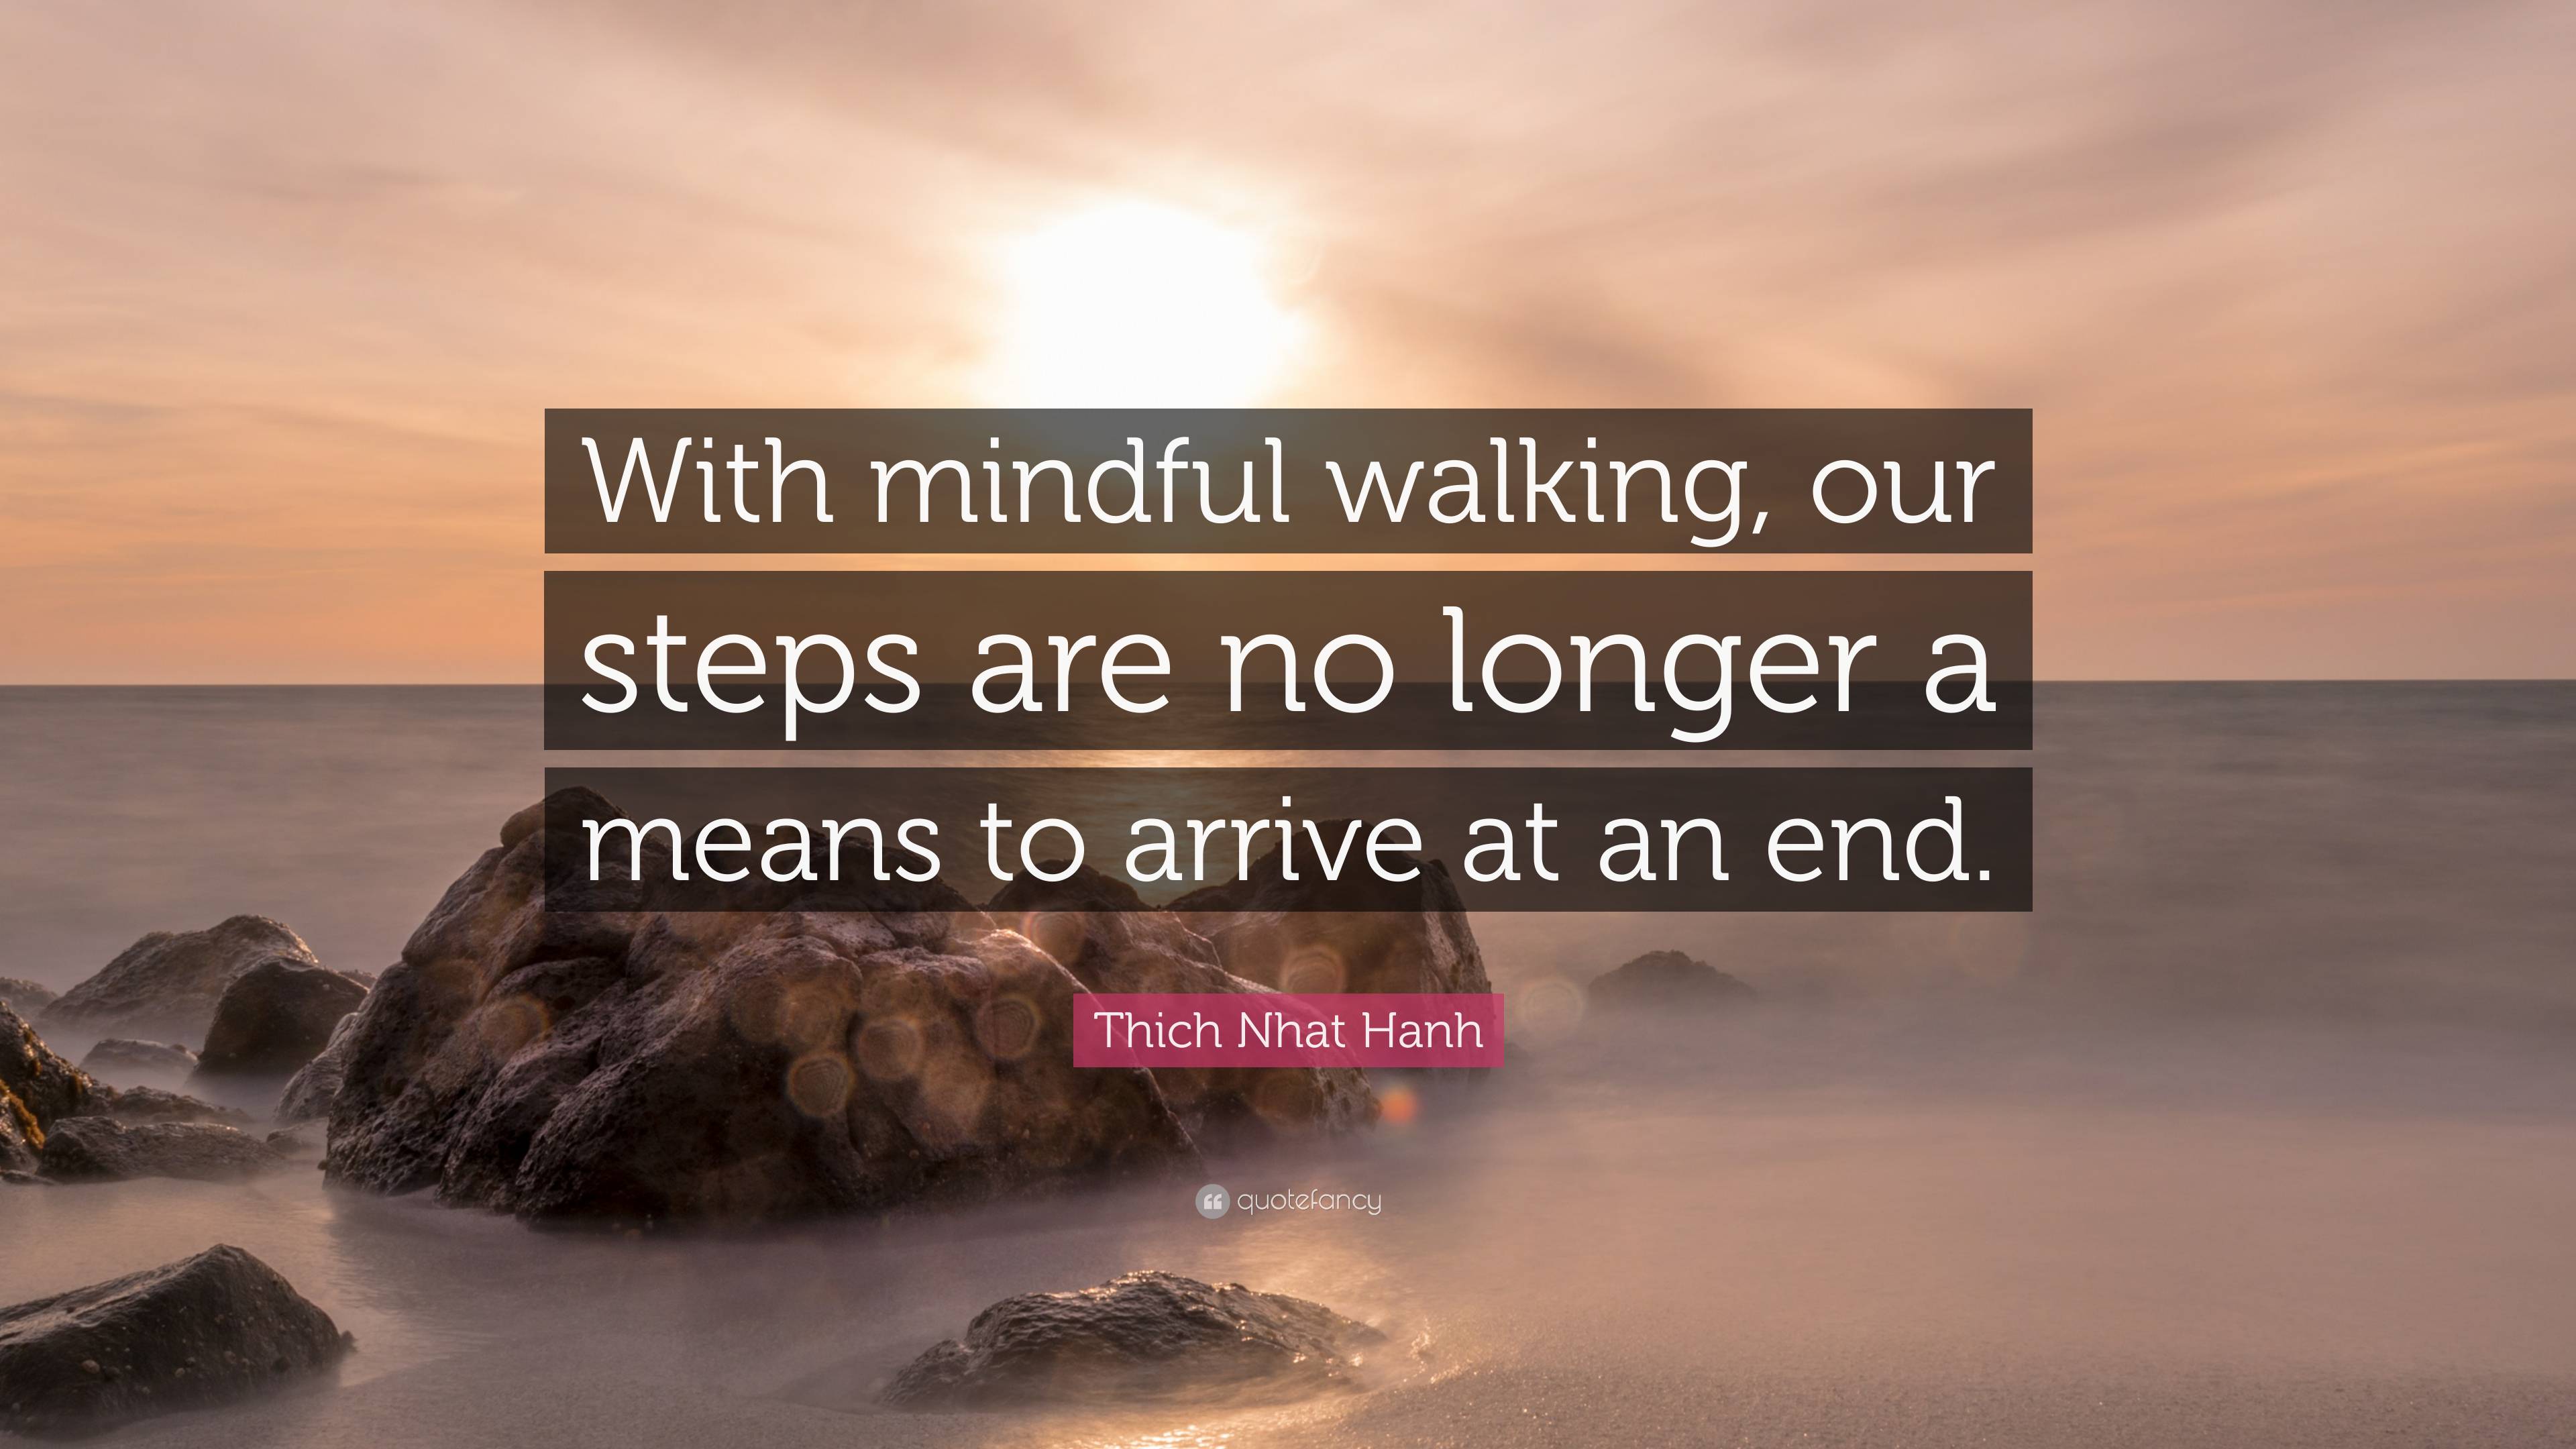 Thich Nhat Hanh Quote: “With mindful walking, our steps are no longer a ...